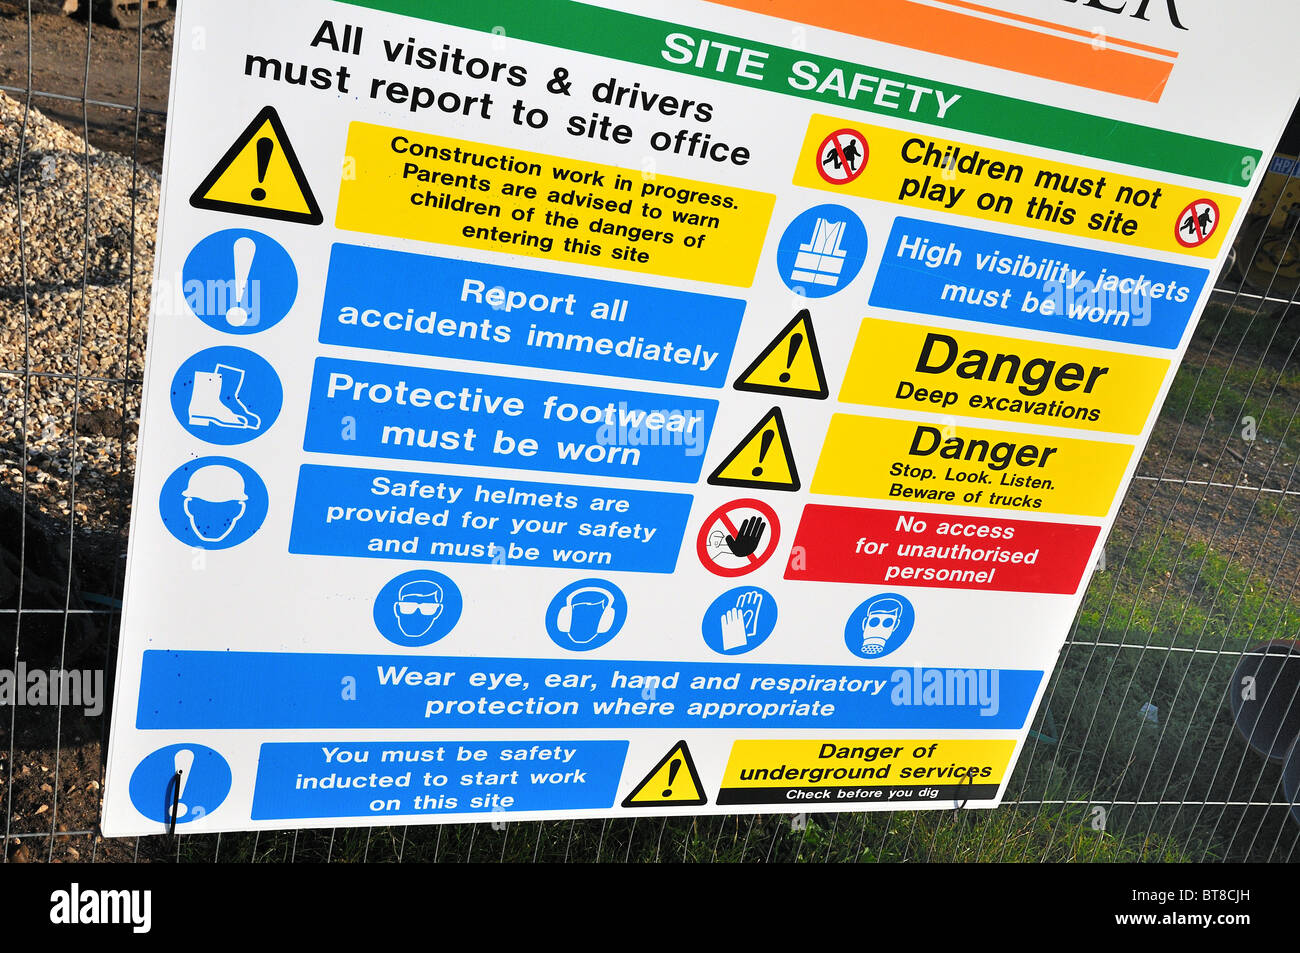 Site safety warning sign in close up Stock Photo